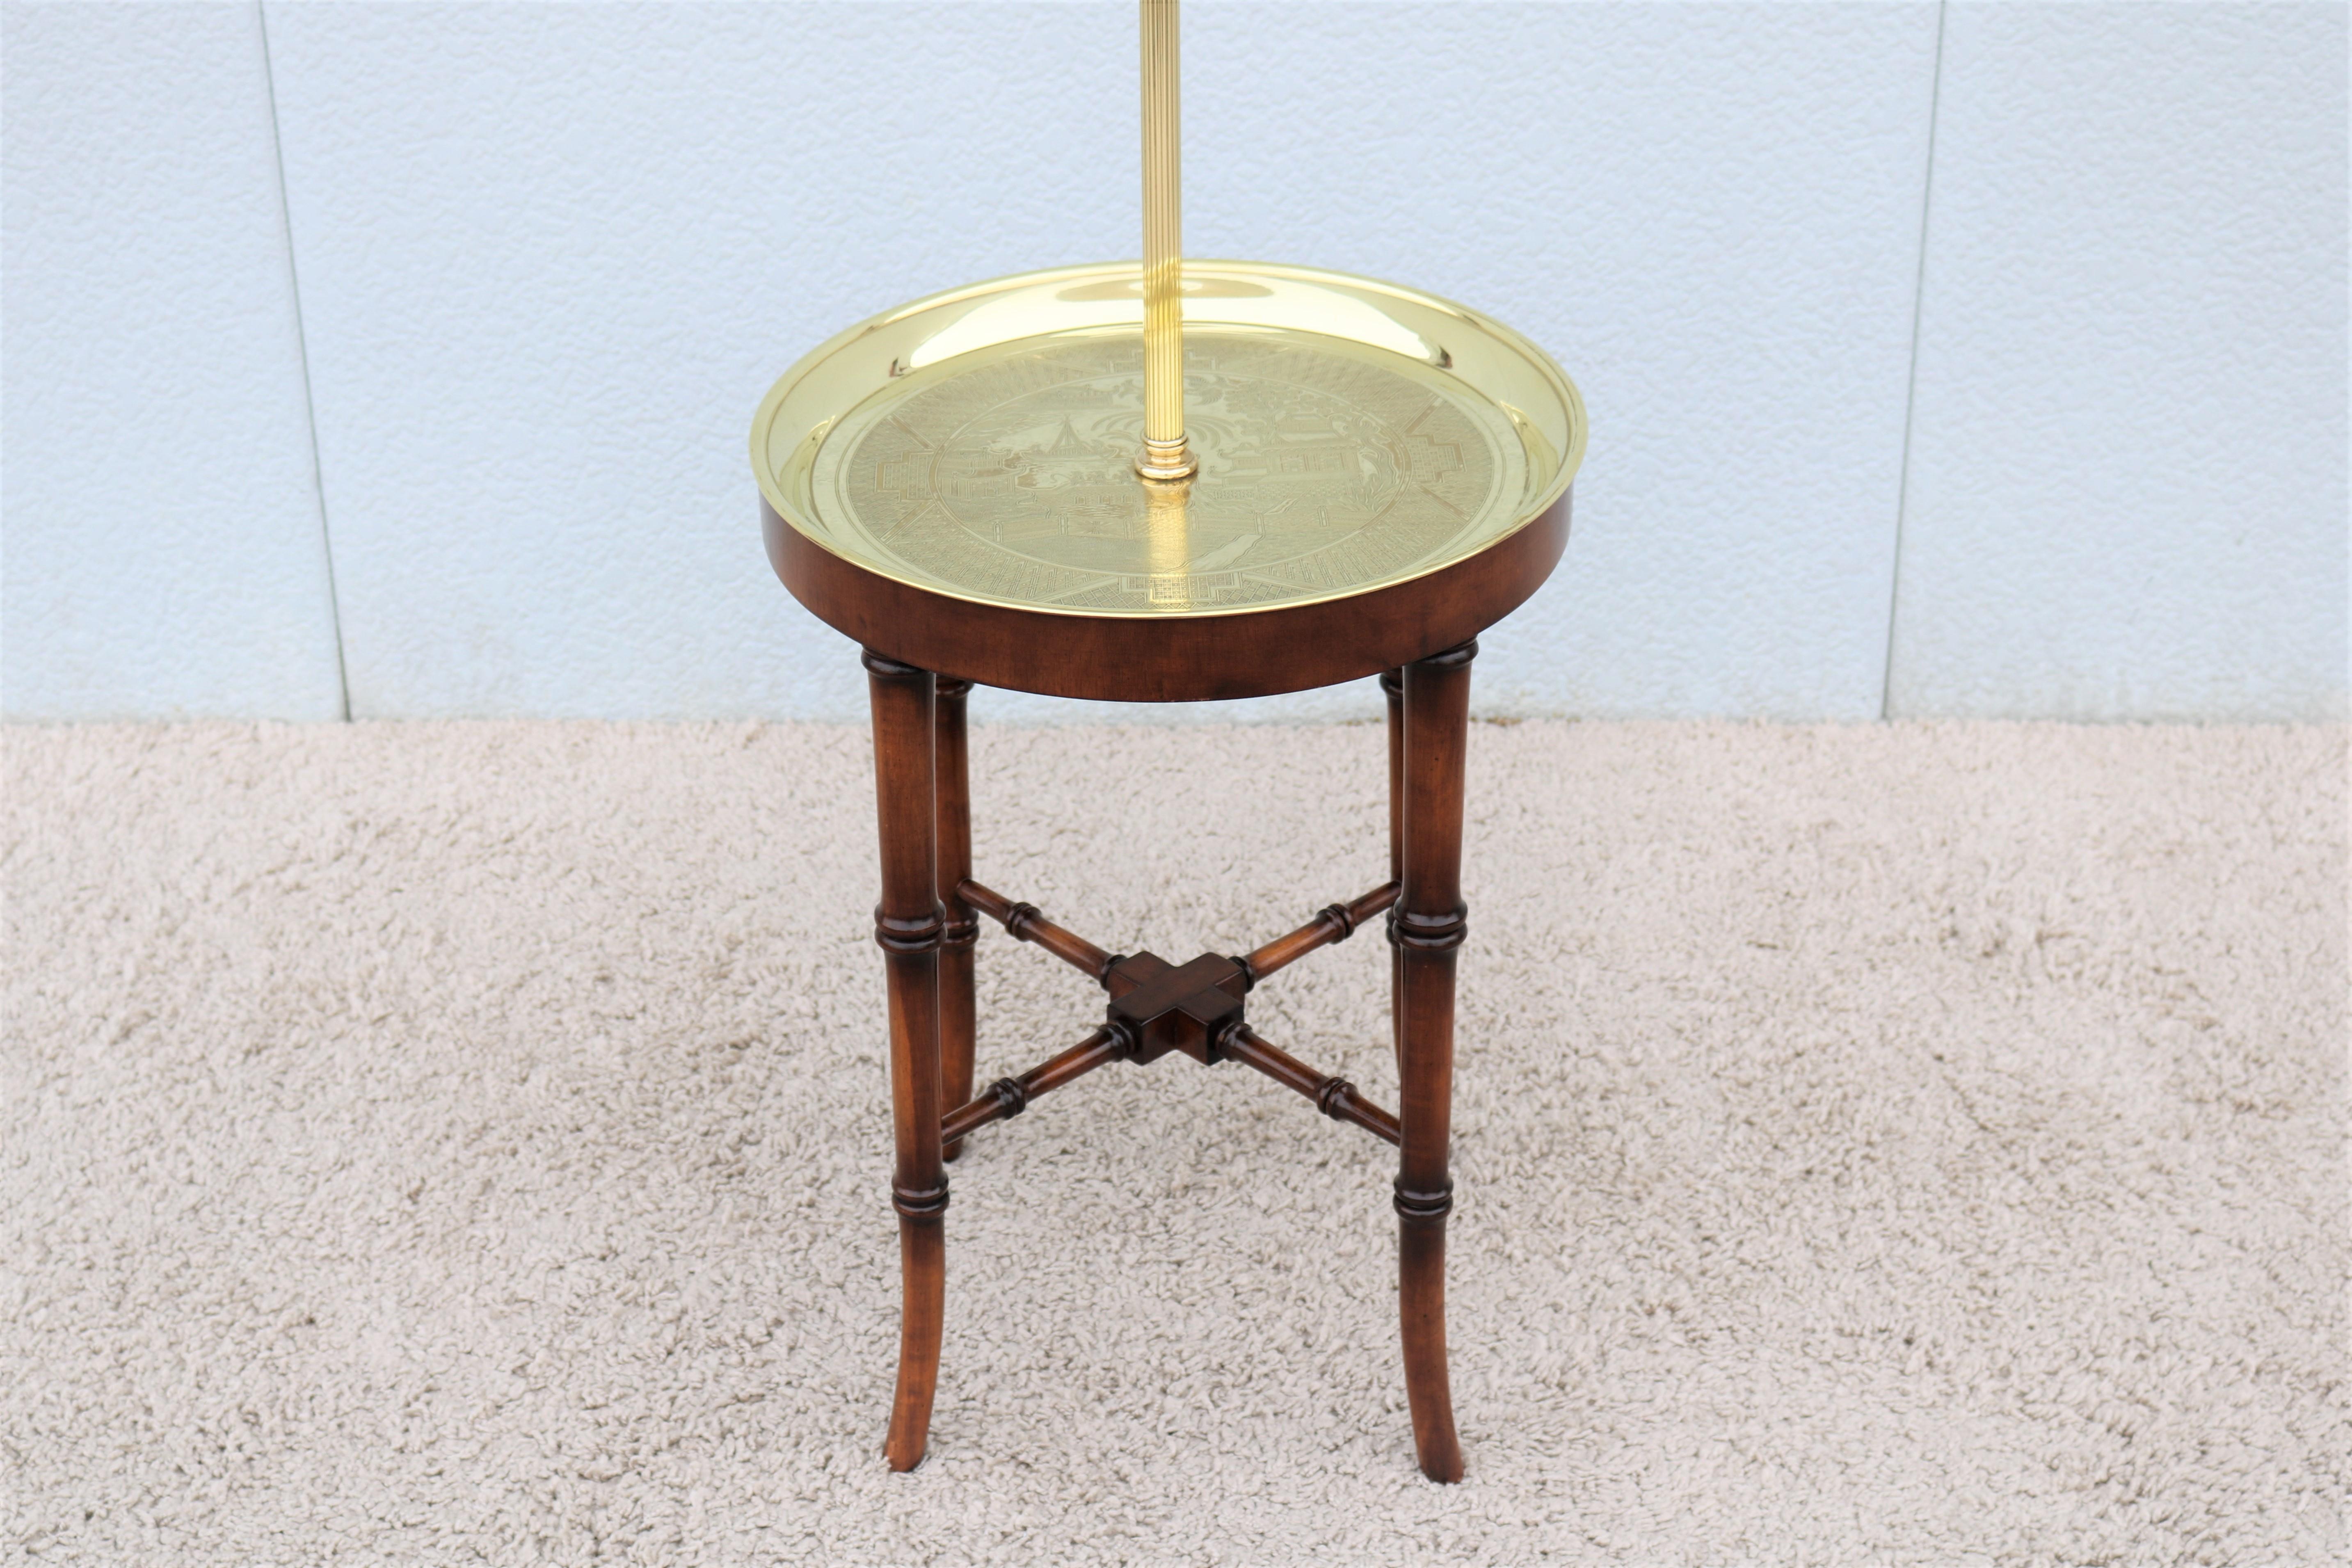 American Vintage Regency Frederick Cooper Faux Bamboo Brass Tray Side Table Floor Lamp